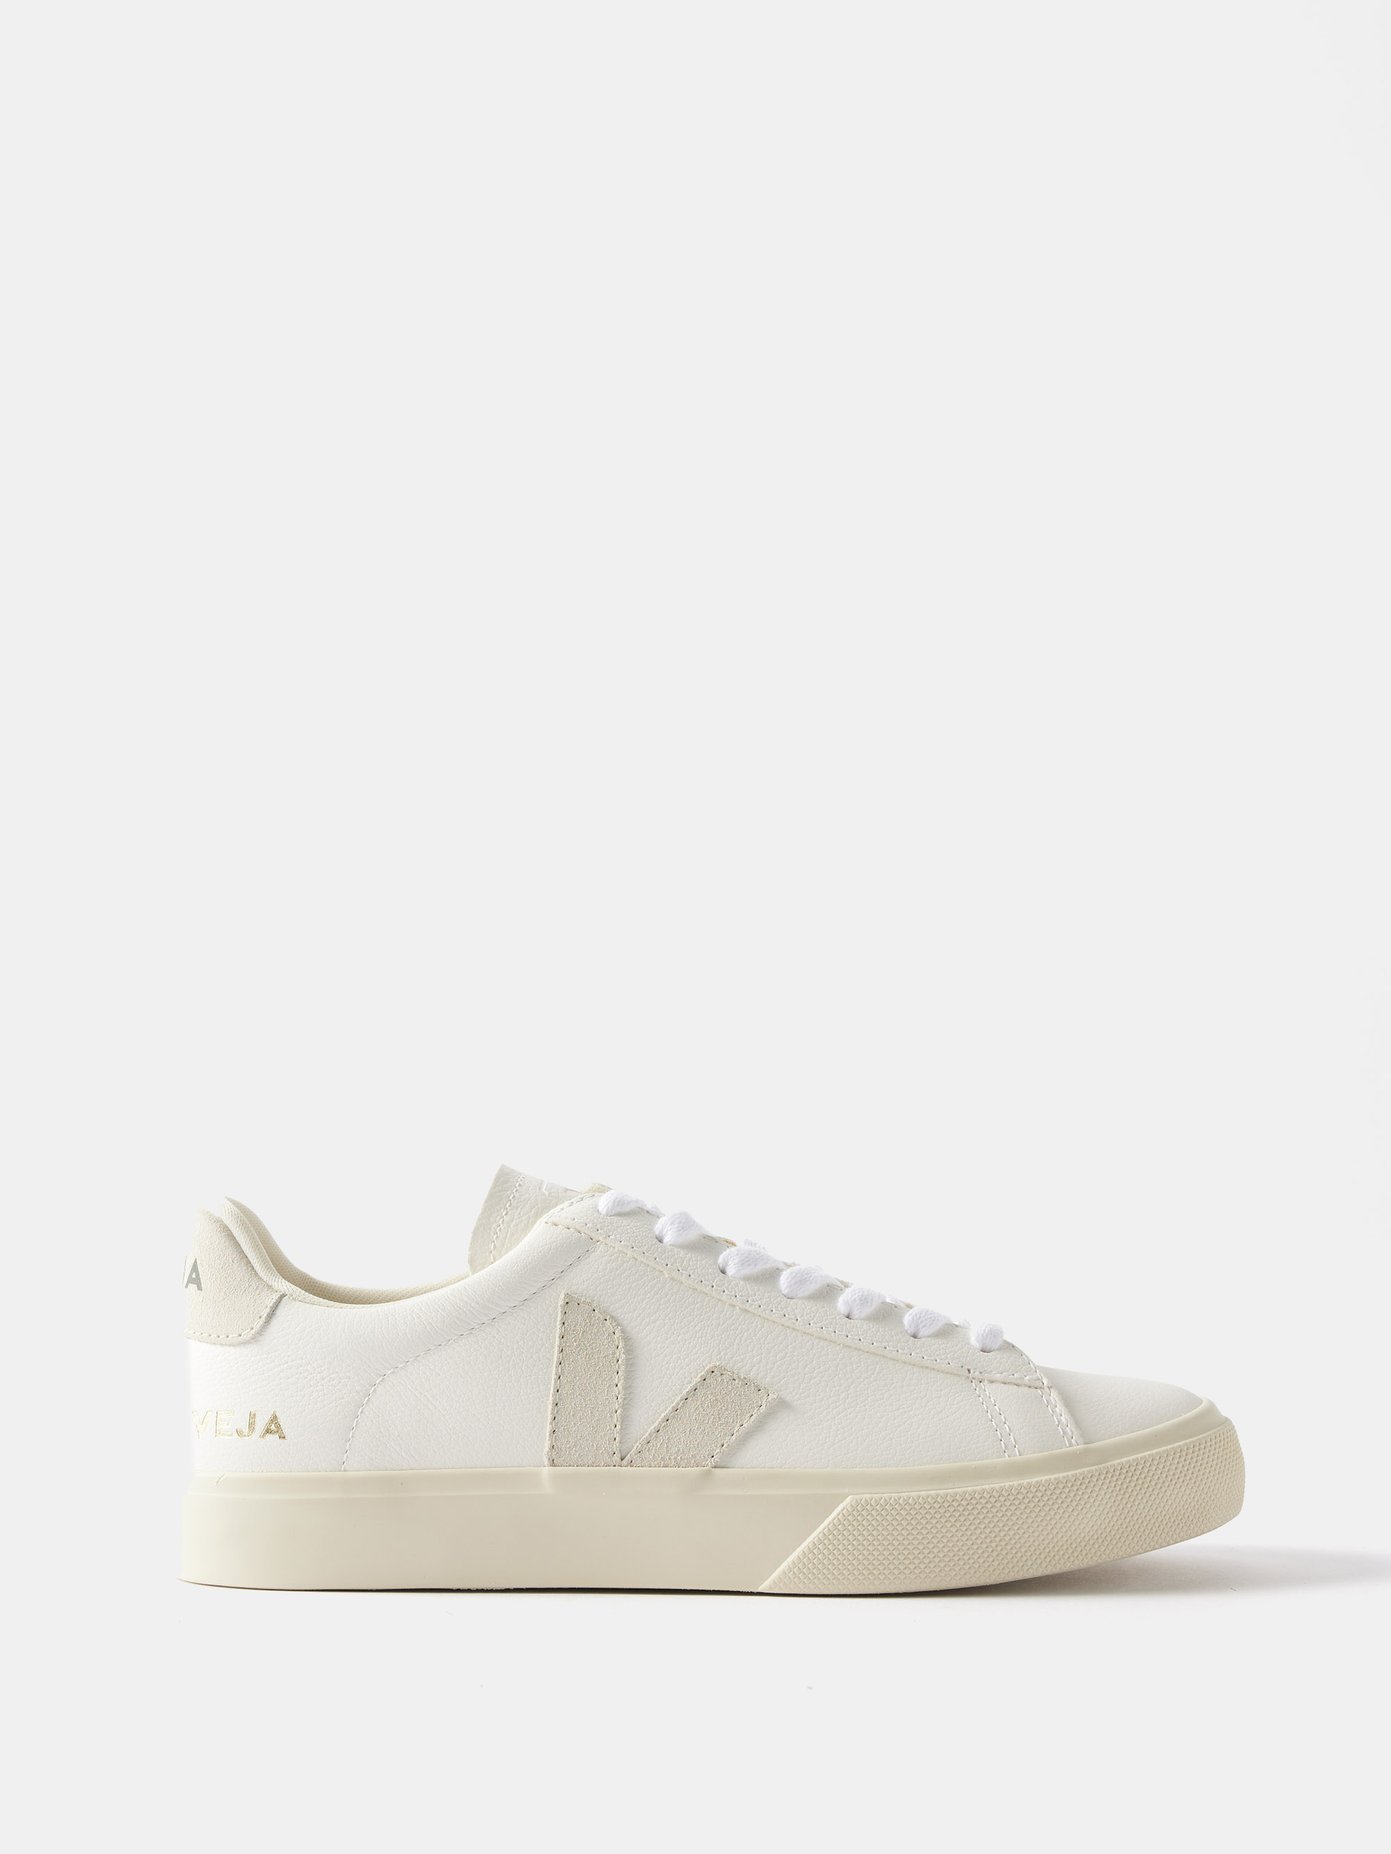 veja campo trainers uk